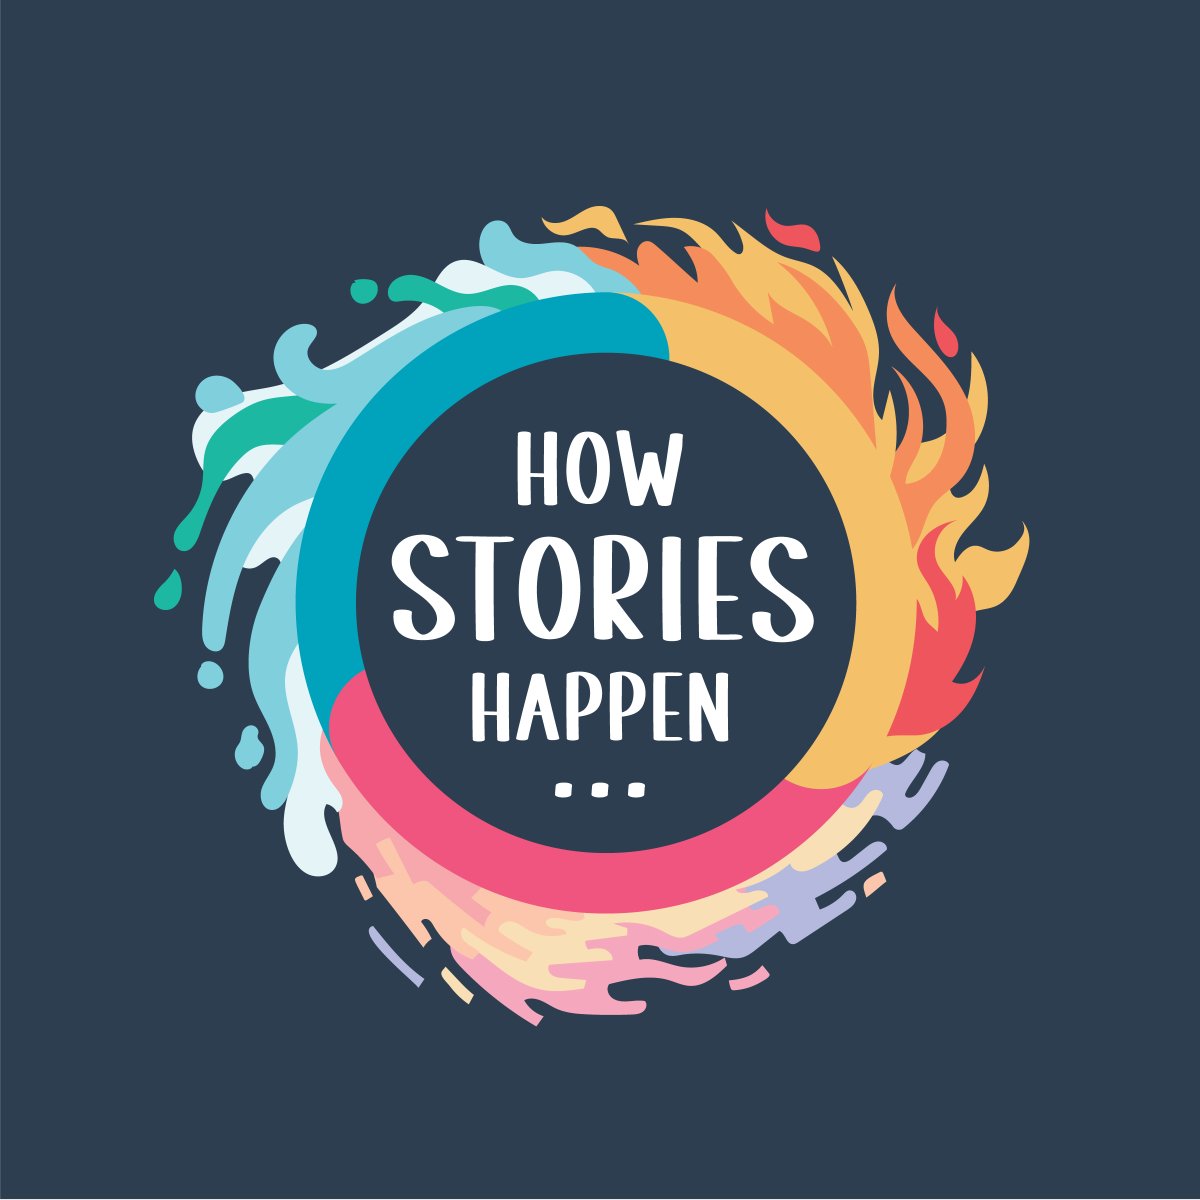 Excited to share: the trailer to my new show, How Stories Happen, is now live! Every episode, entrepreneurs creators dissect signature stories piece by piece. Hear the trailer & follow the show anywhere you get your podcasts. For more, go here: jayacunzo.com/how-stories-ha…